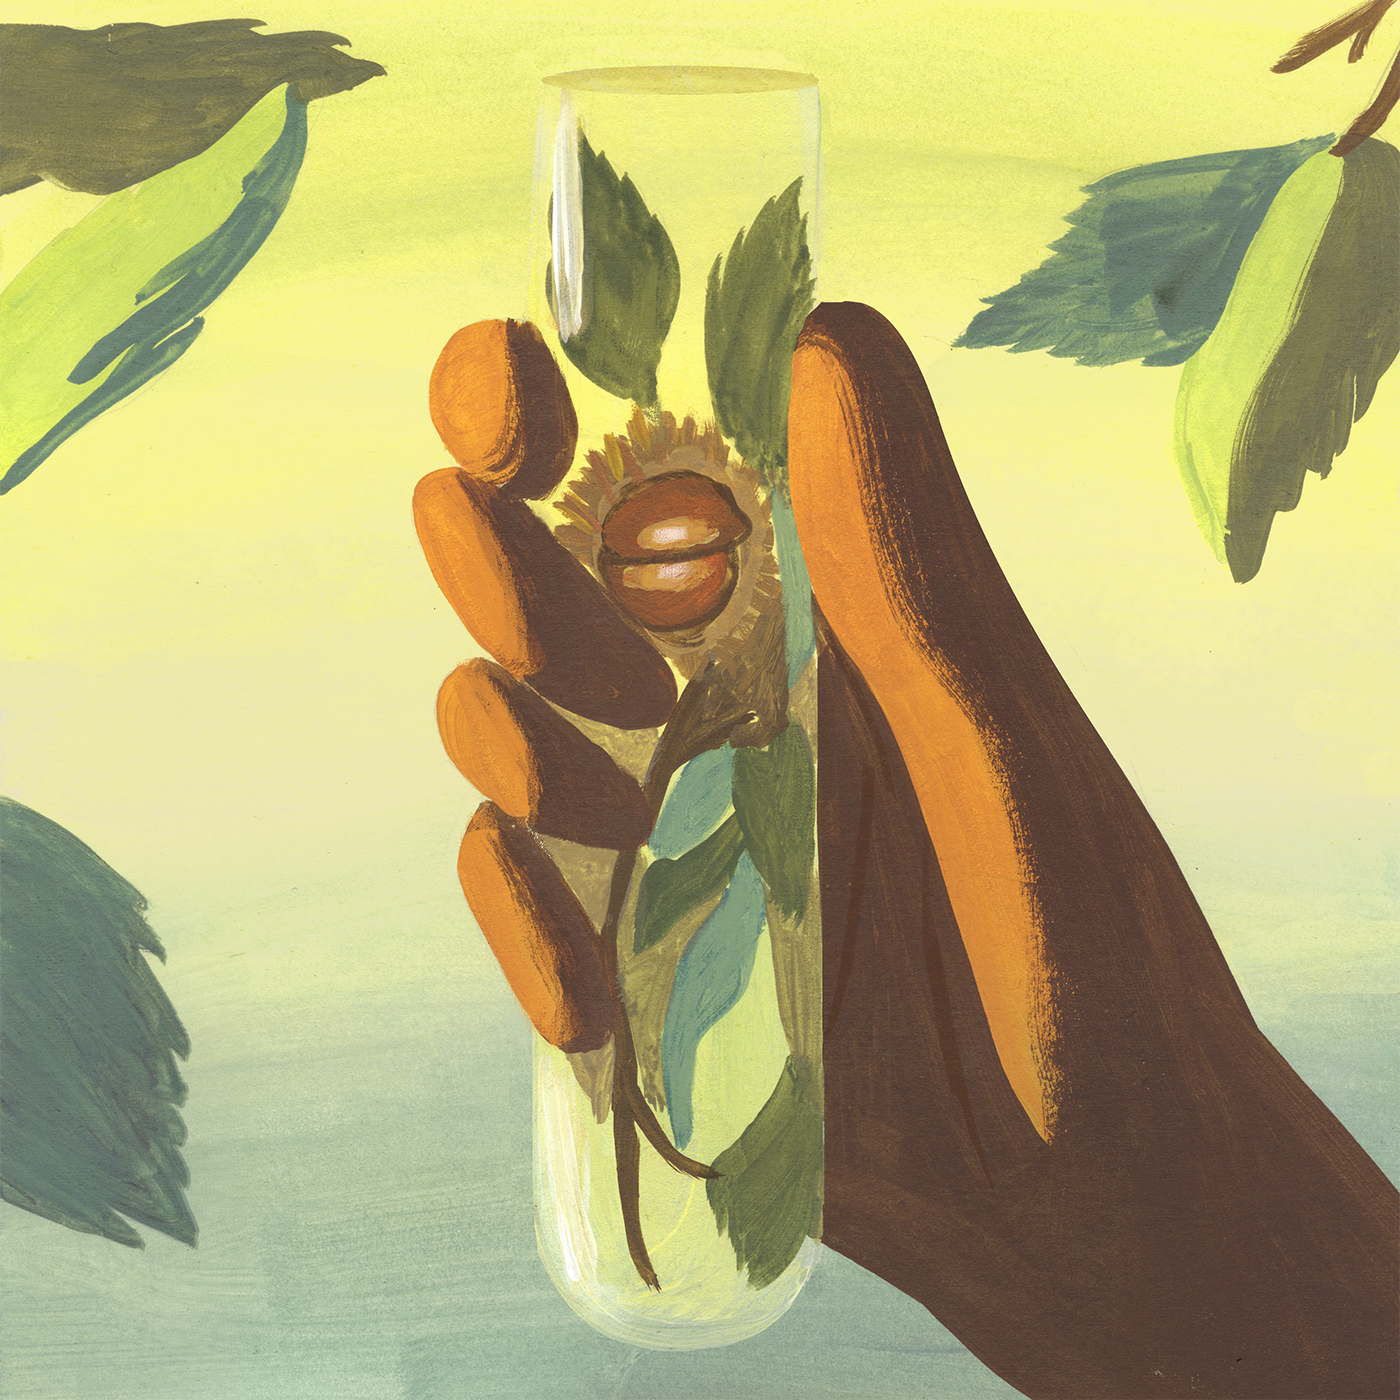 Illustration of test tube with American Chestnut branch growing inside